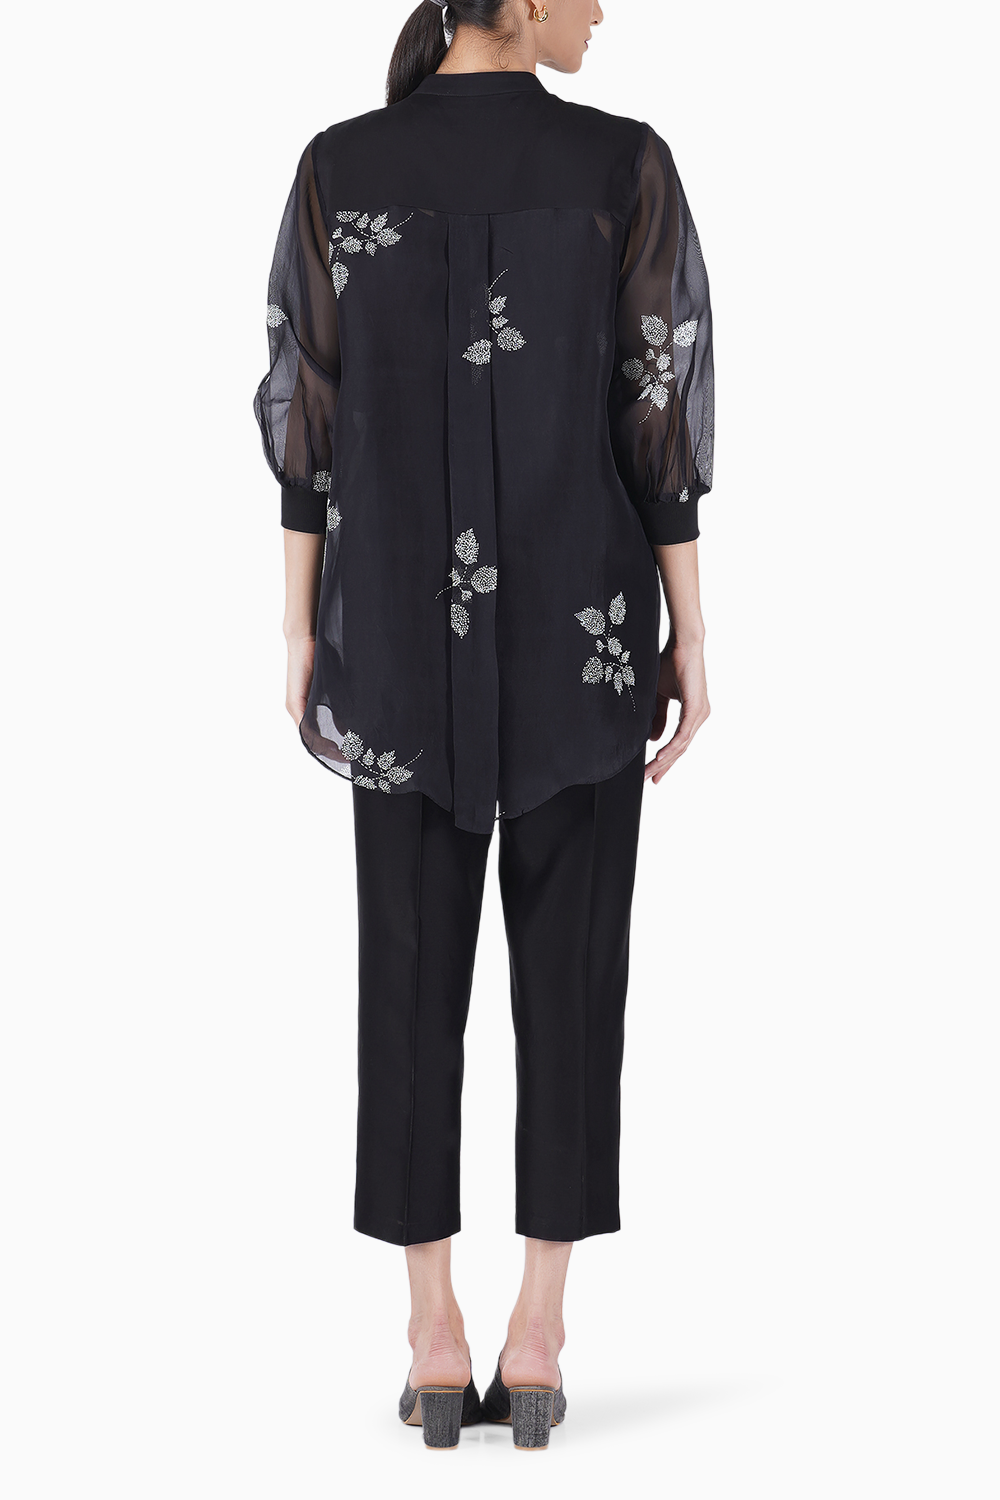 Black Leaf Print Shirt with Top and Pants